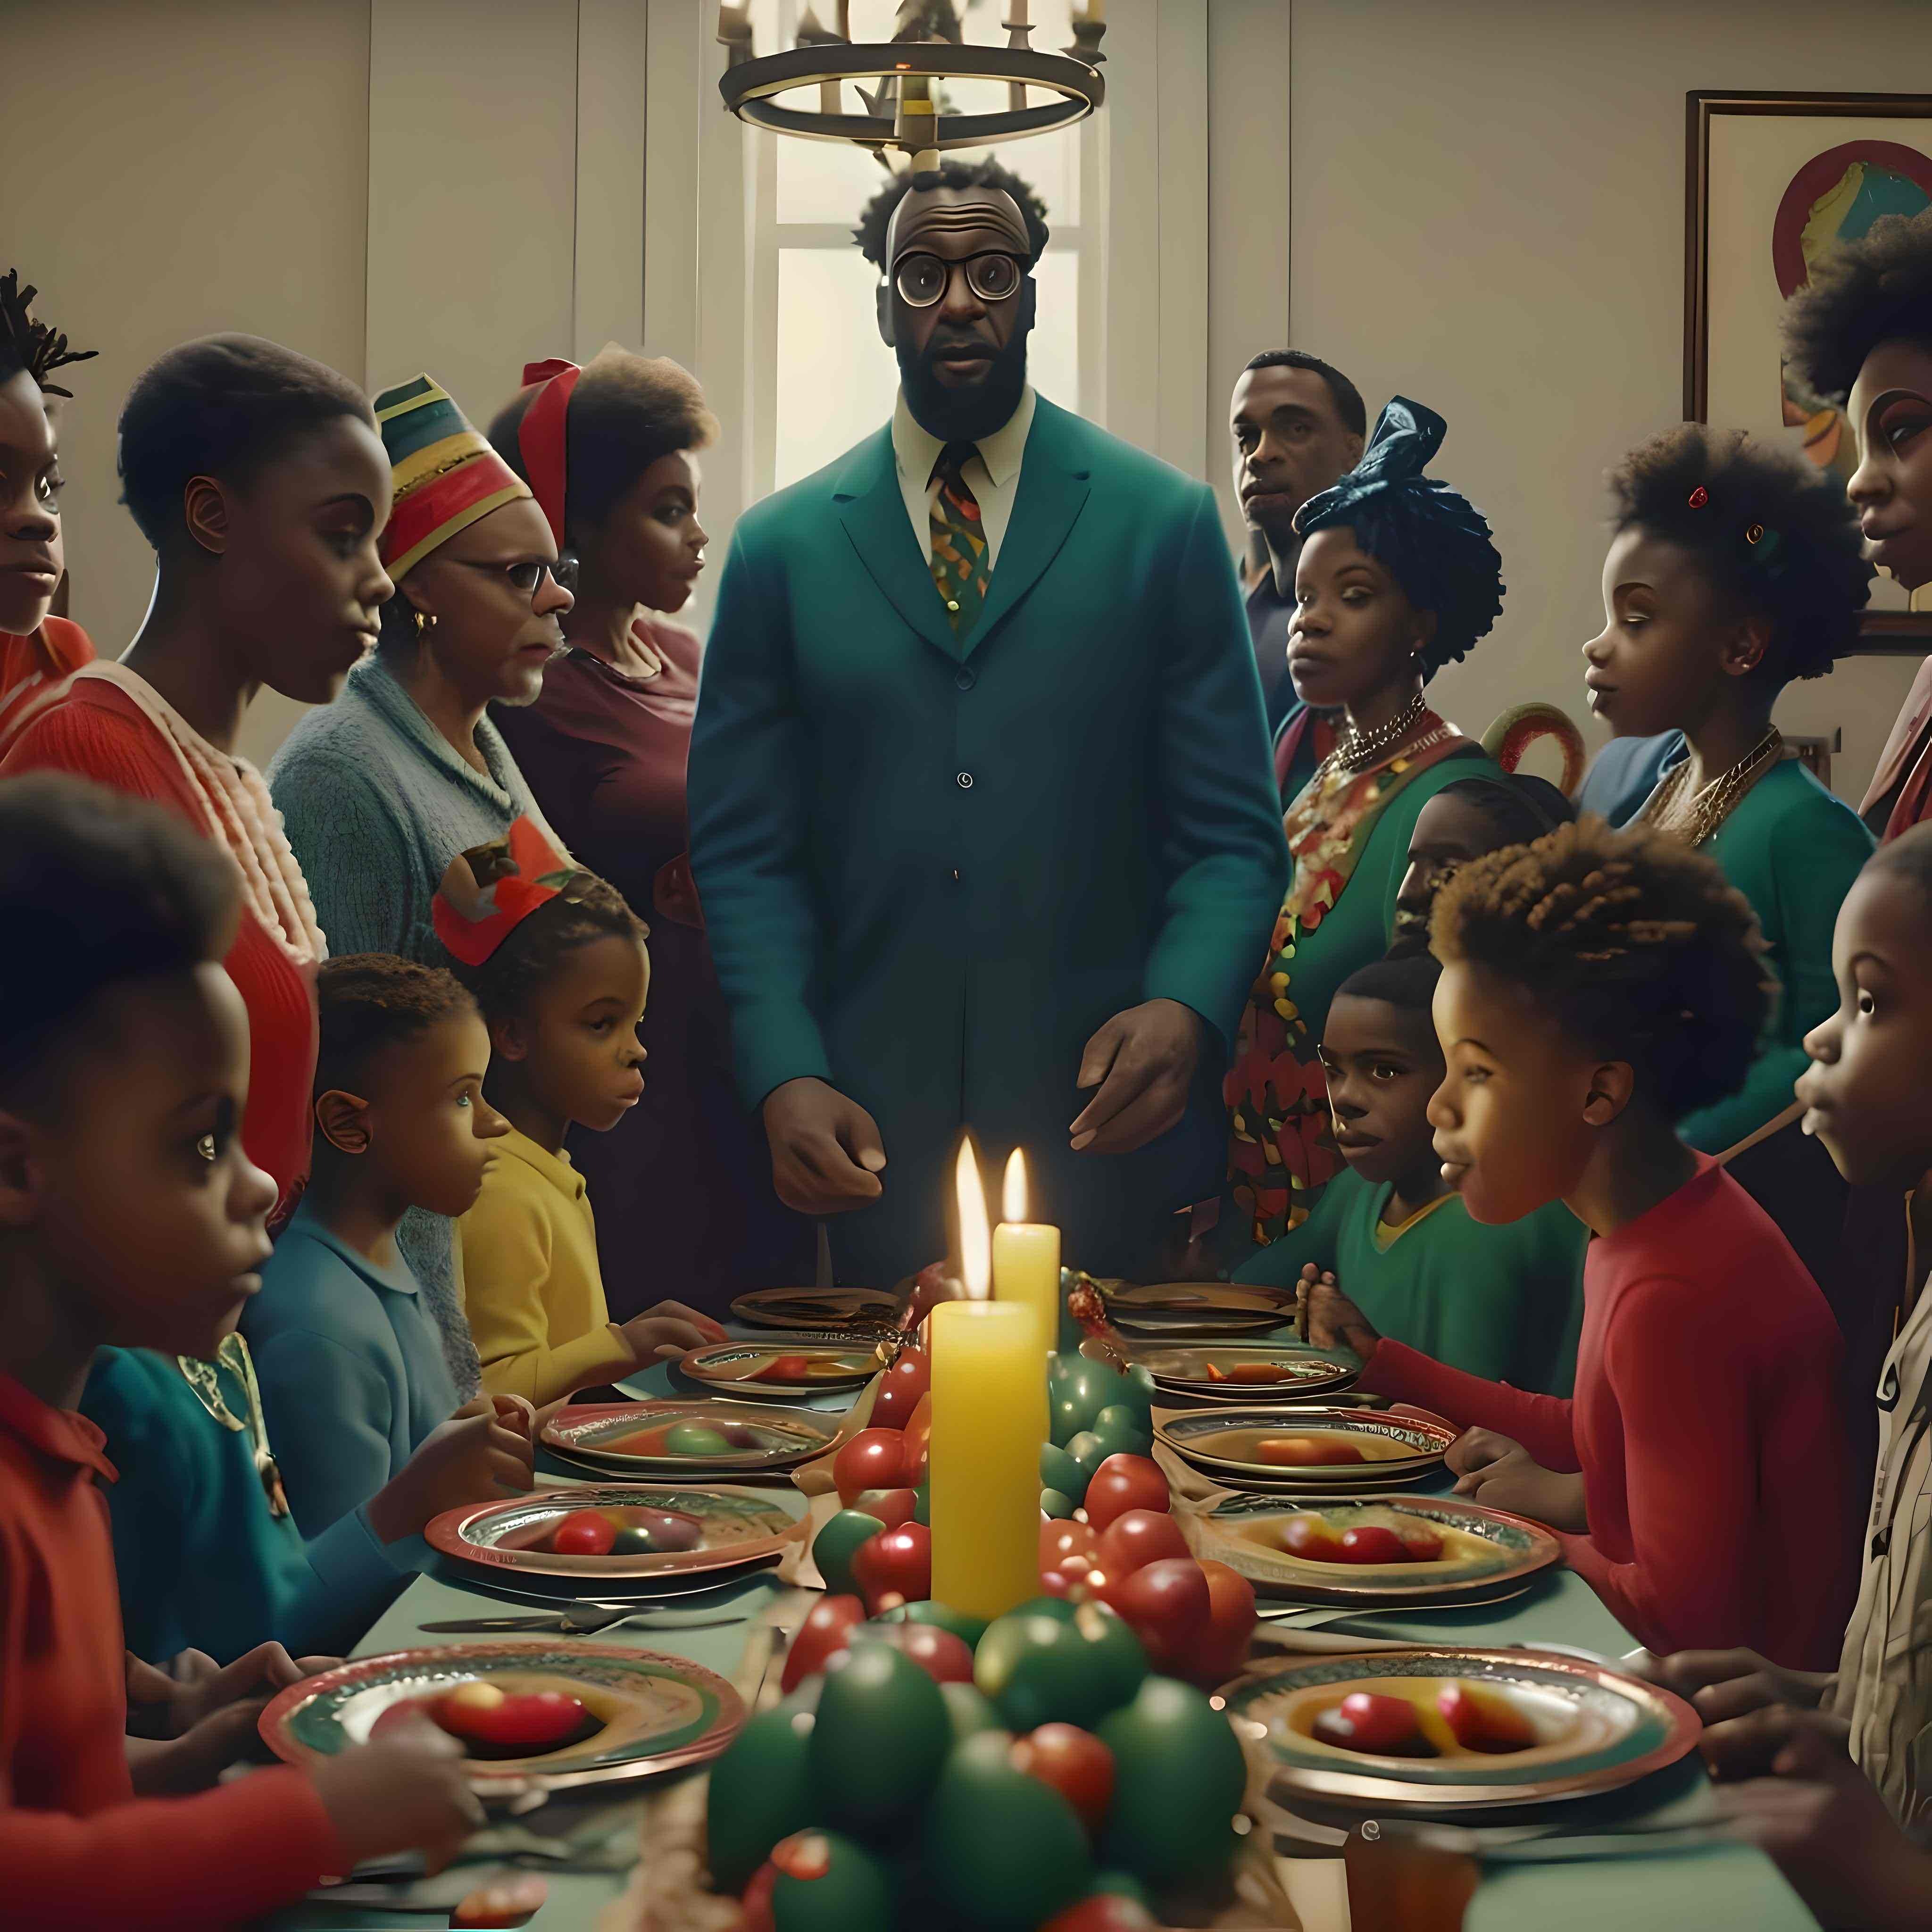 Crazy Kwanzaa in the style of Norman Rockwell